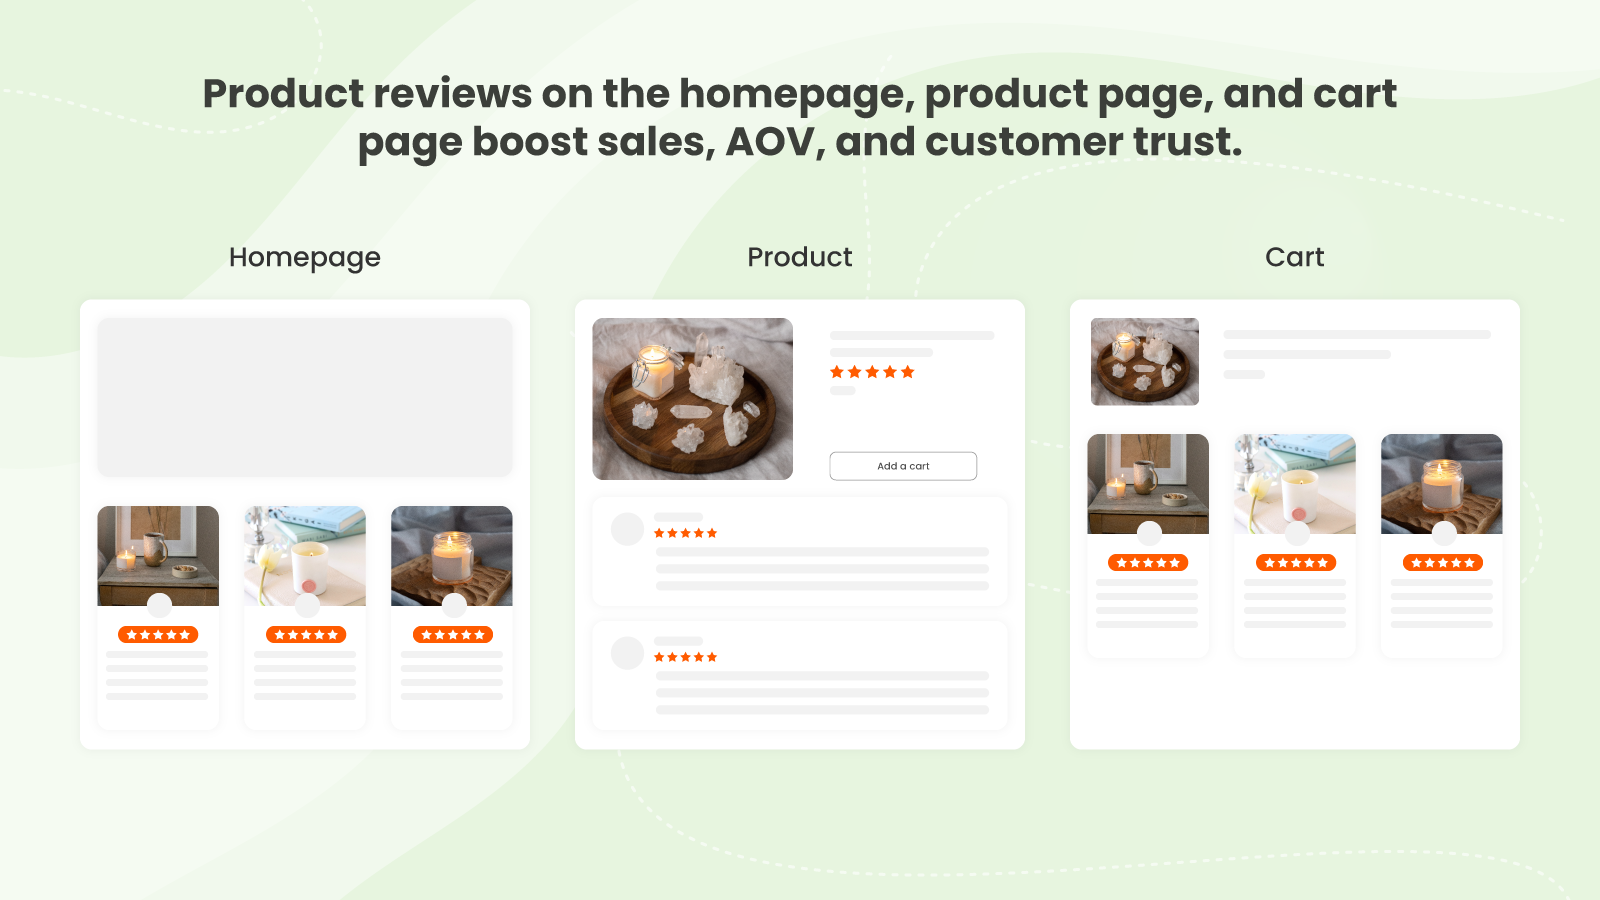 Product reviews on home, product and cart pages